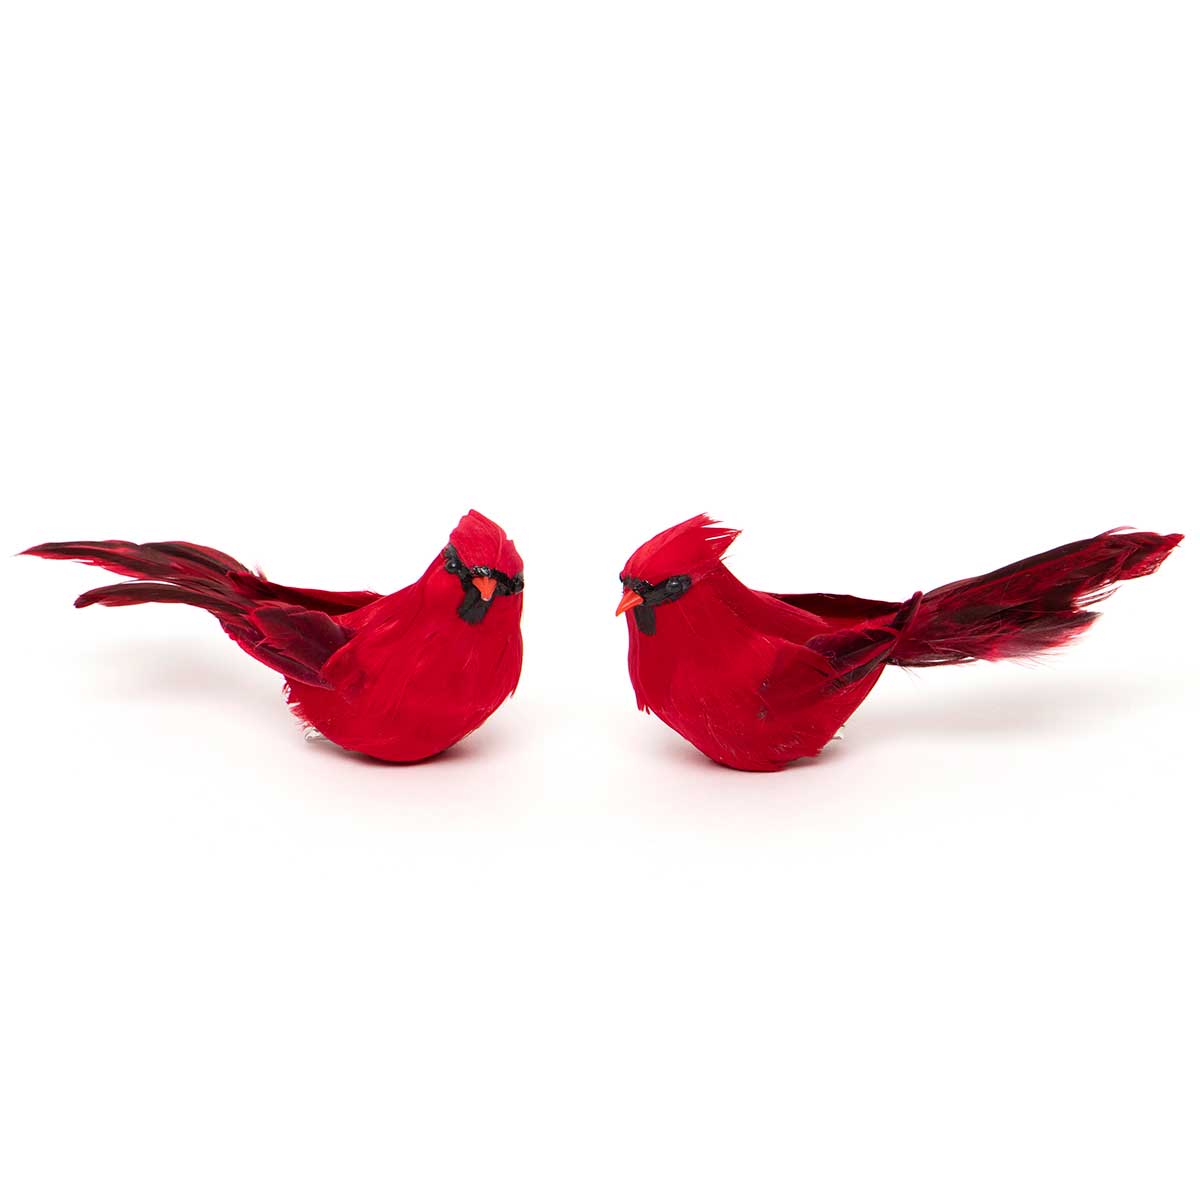 CARDINAL 2 ASSORTED 6.5IN X 2IN X 2.5IN RED/BLACK WITH METAL CLI